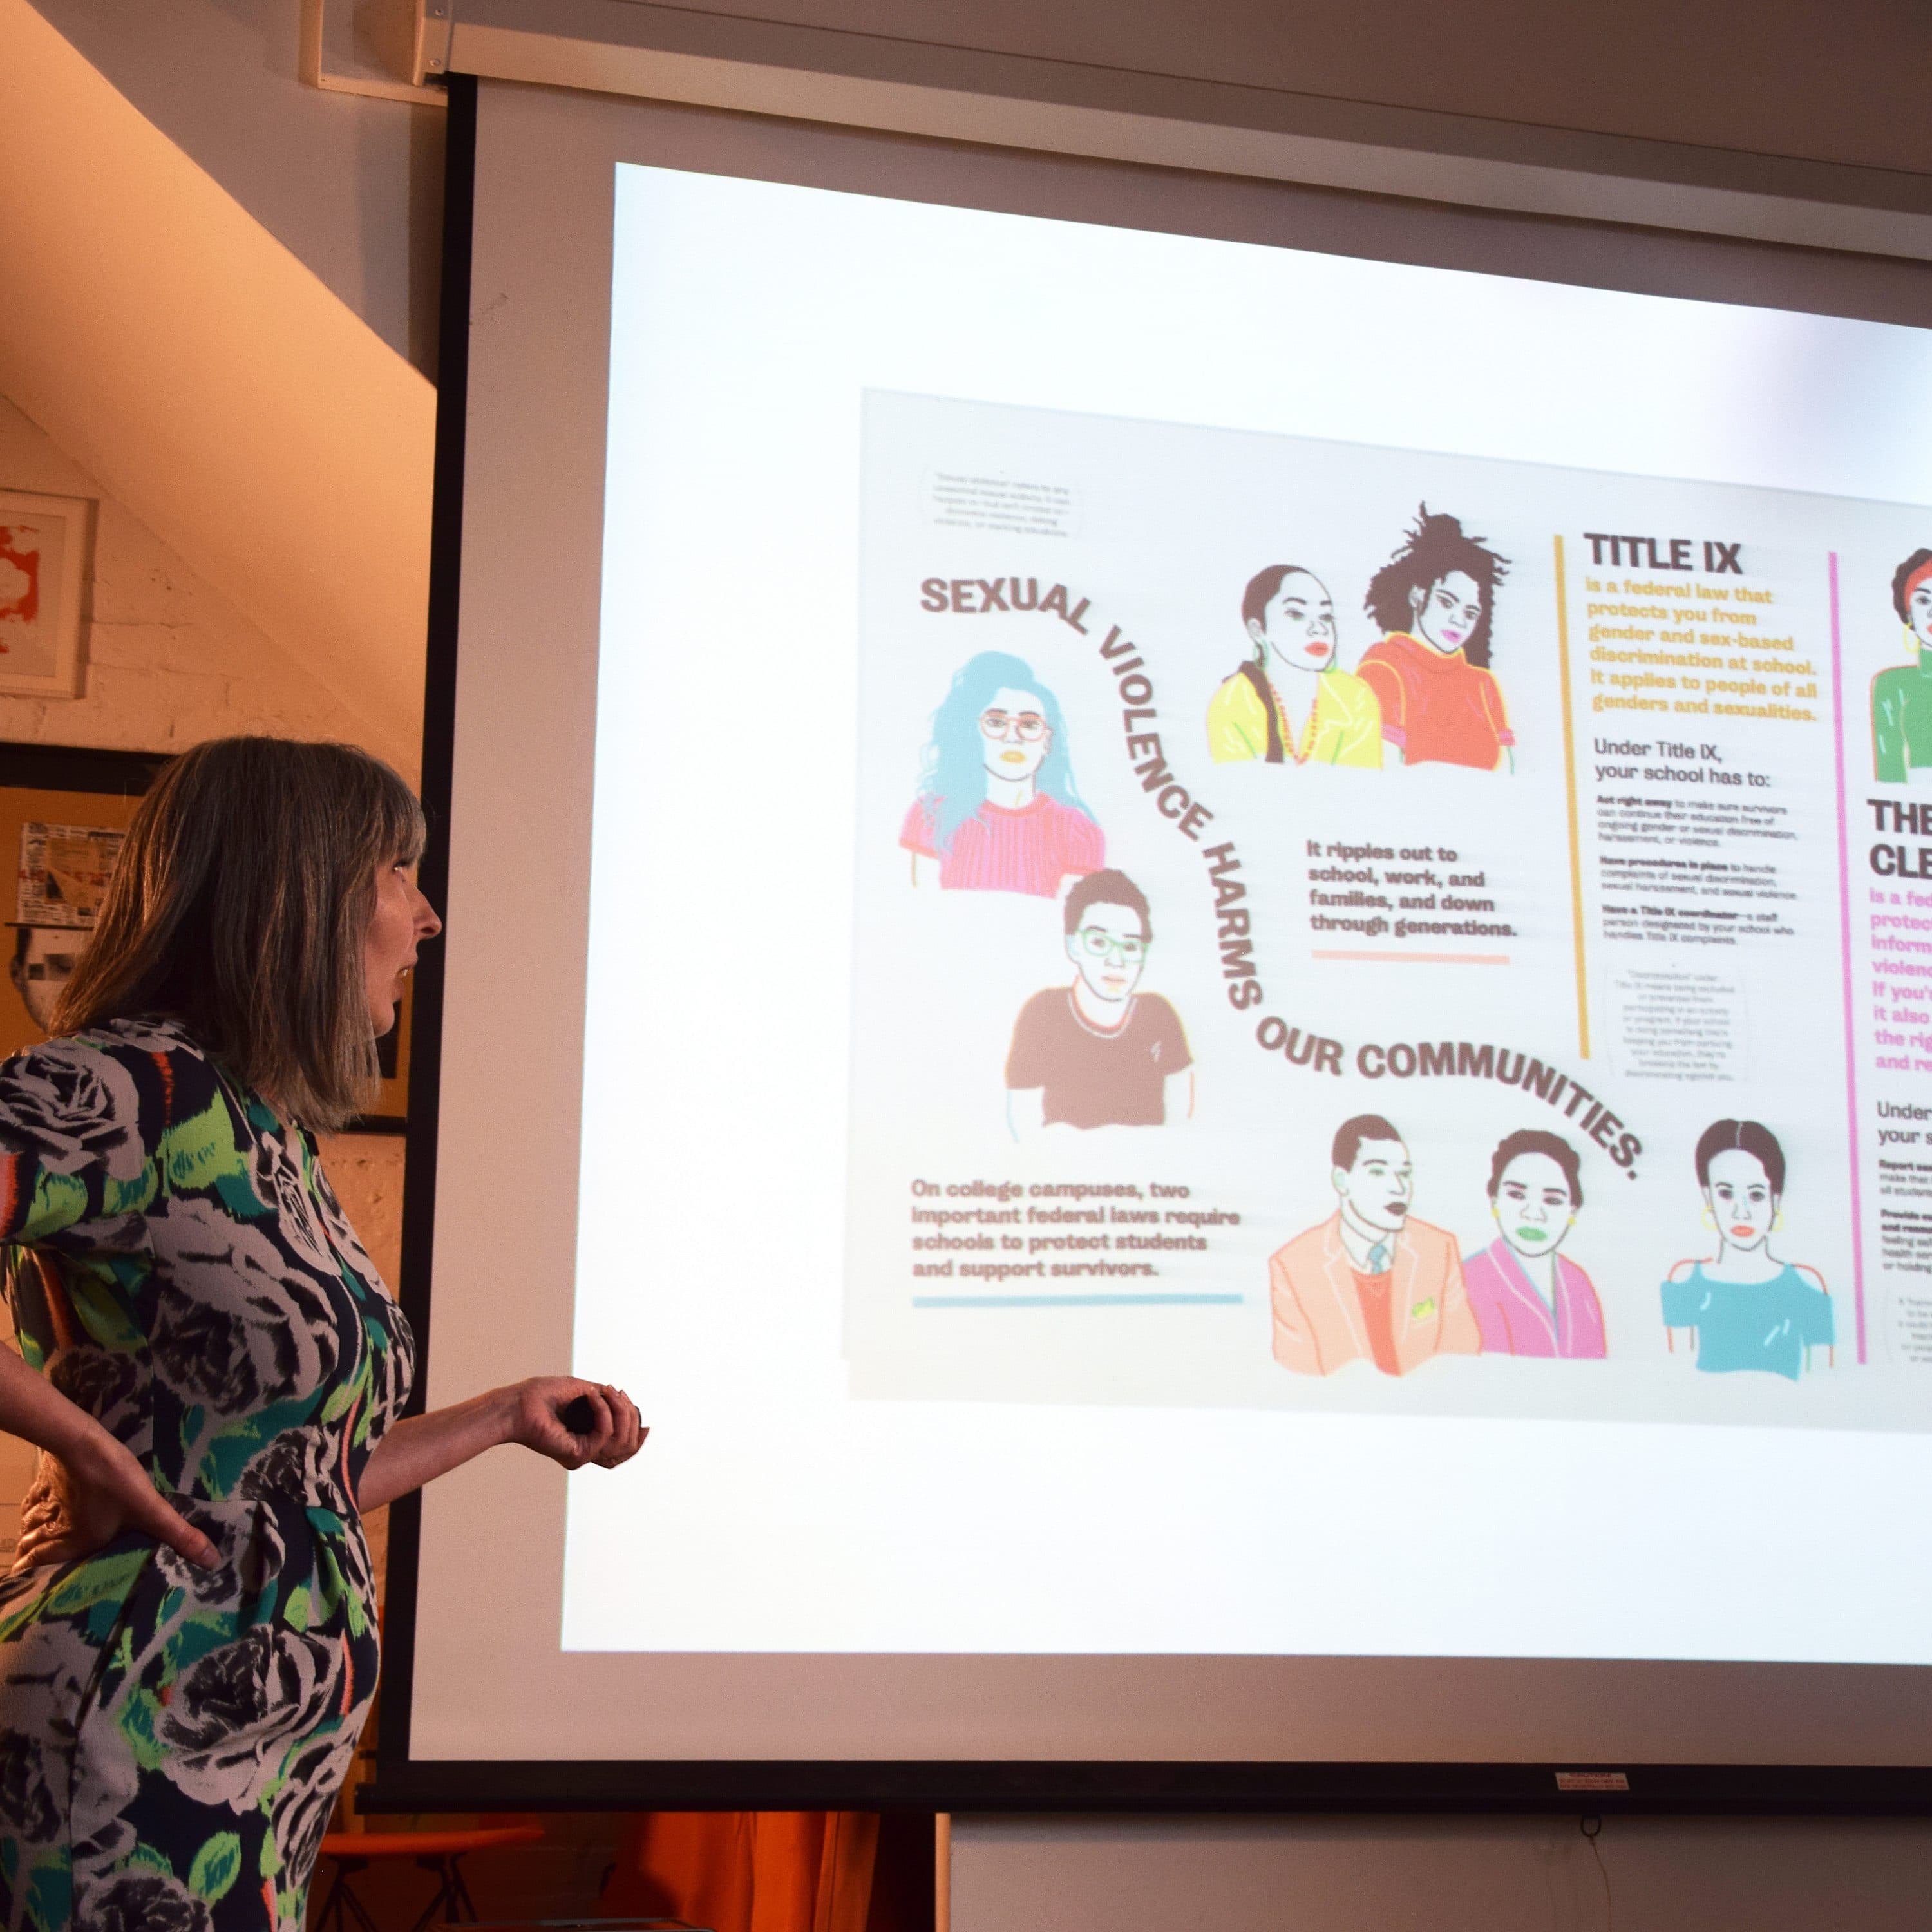 A person with long gray hair and a patterned dress is standing in front of a screen displaying educational posters about sexual violence, community support, and Title IX. The screen features cartoon-style illustrations and informative text on these topics.